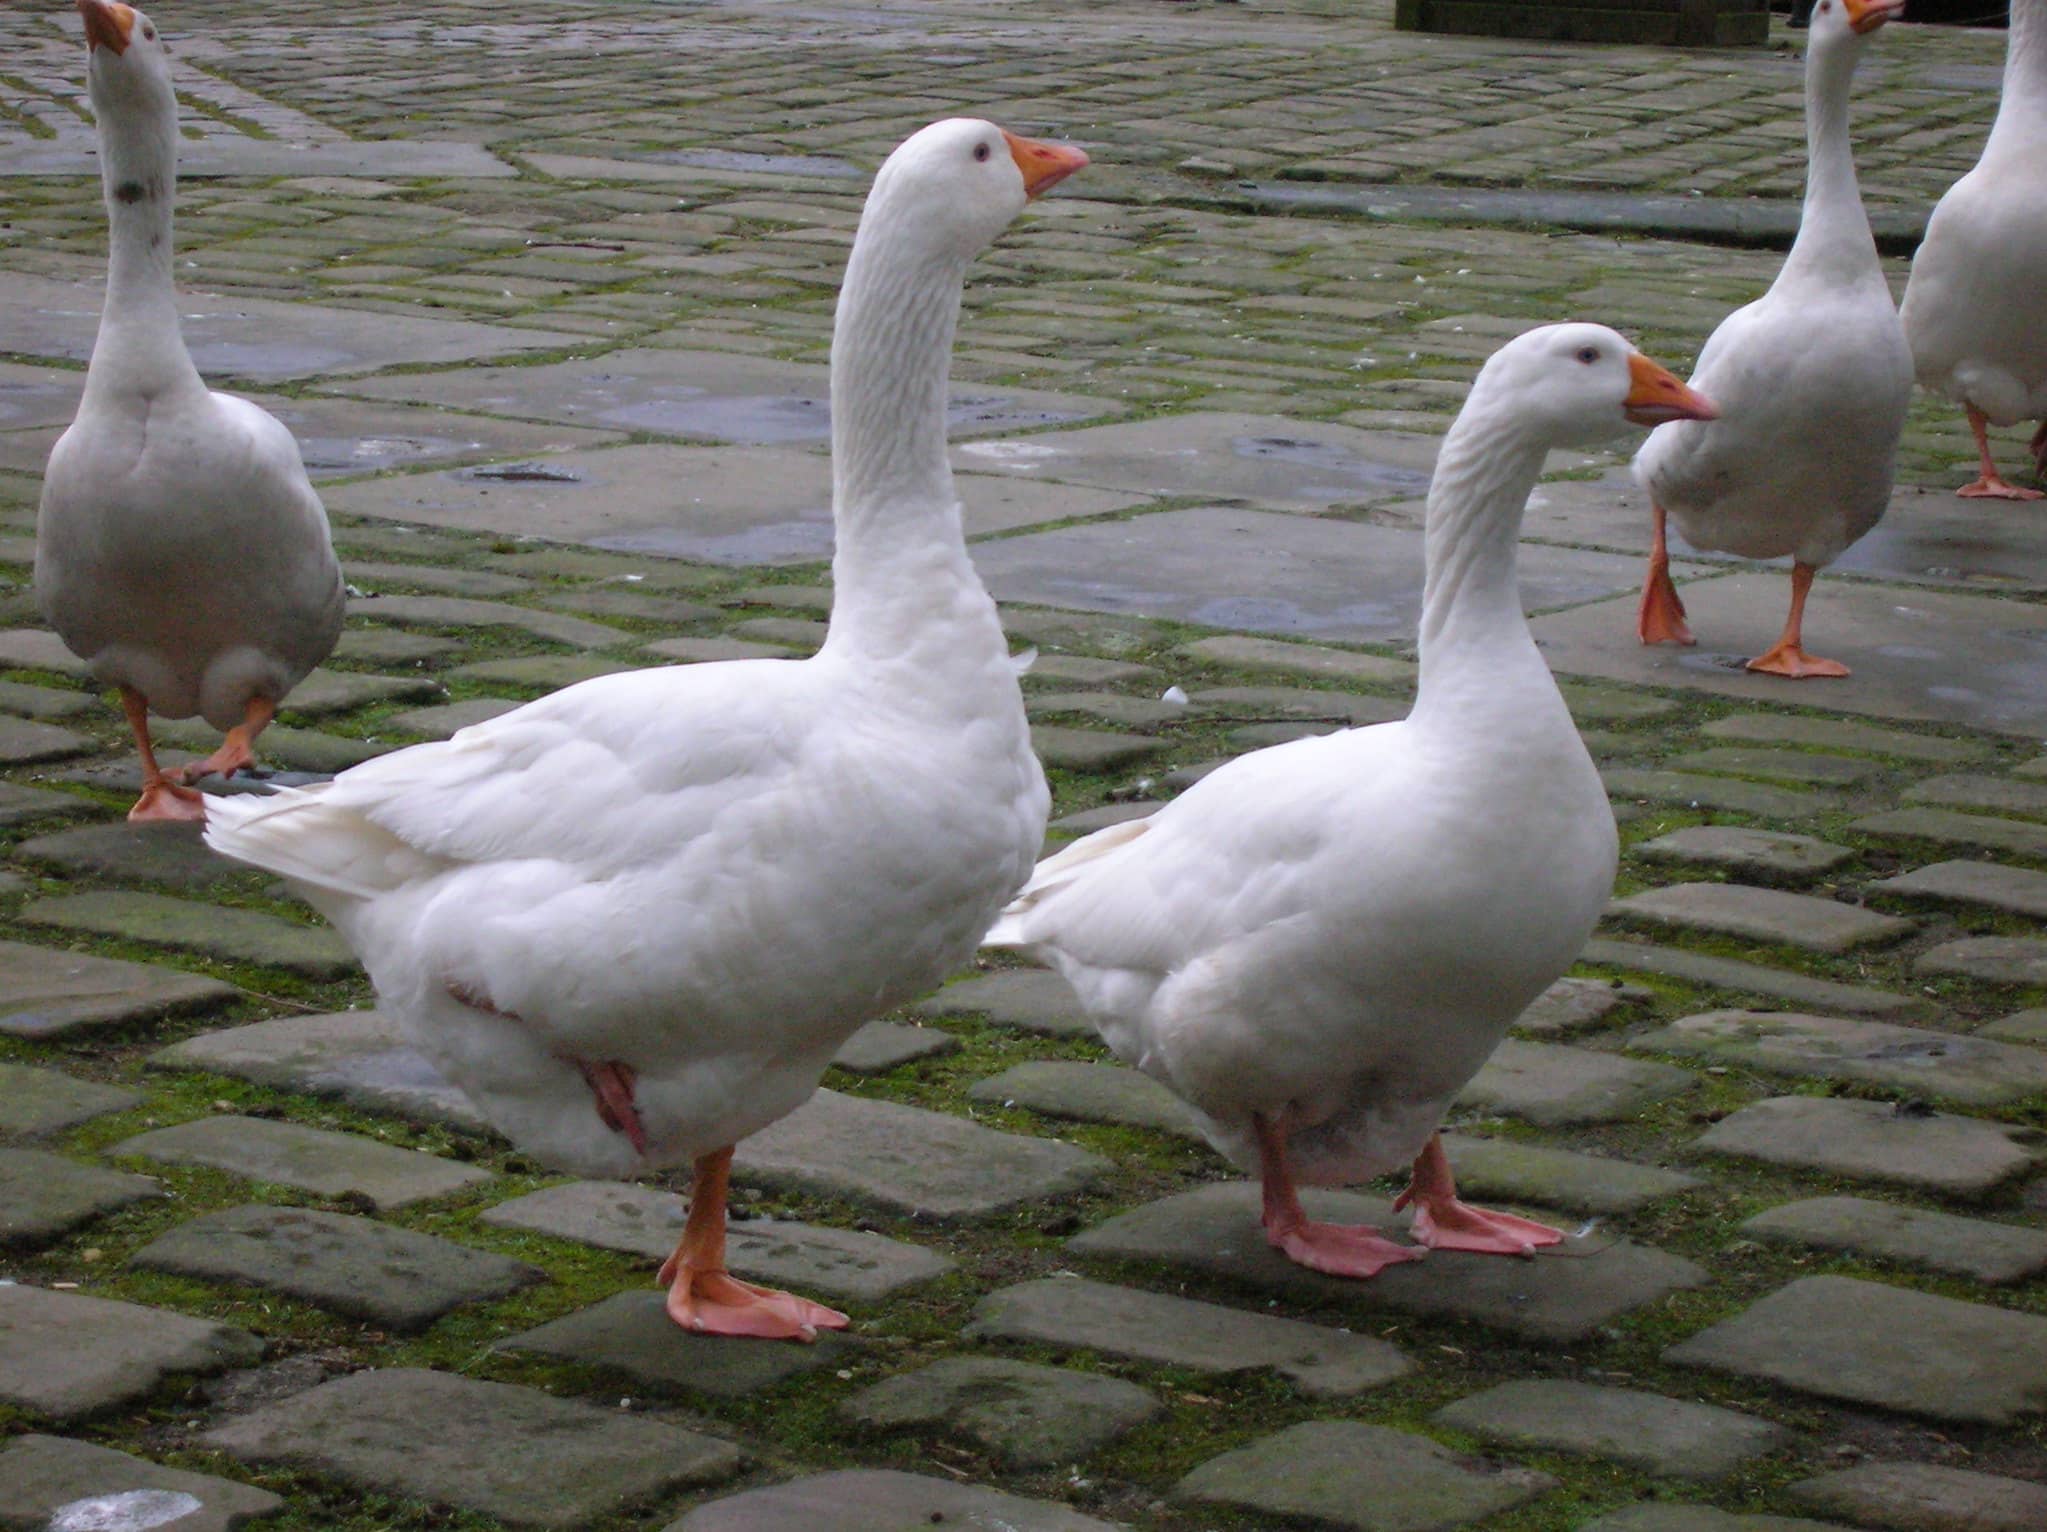 Geese on cobble stones